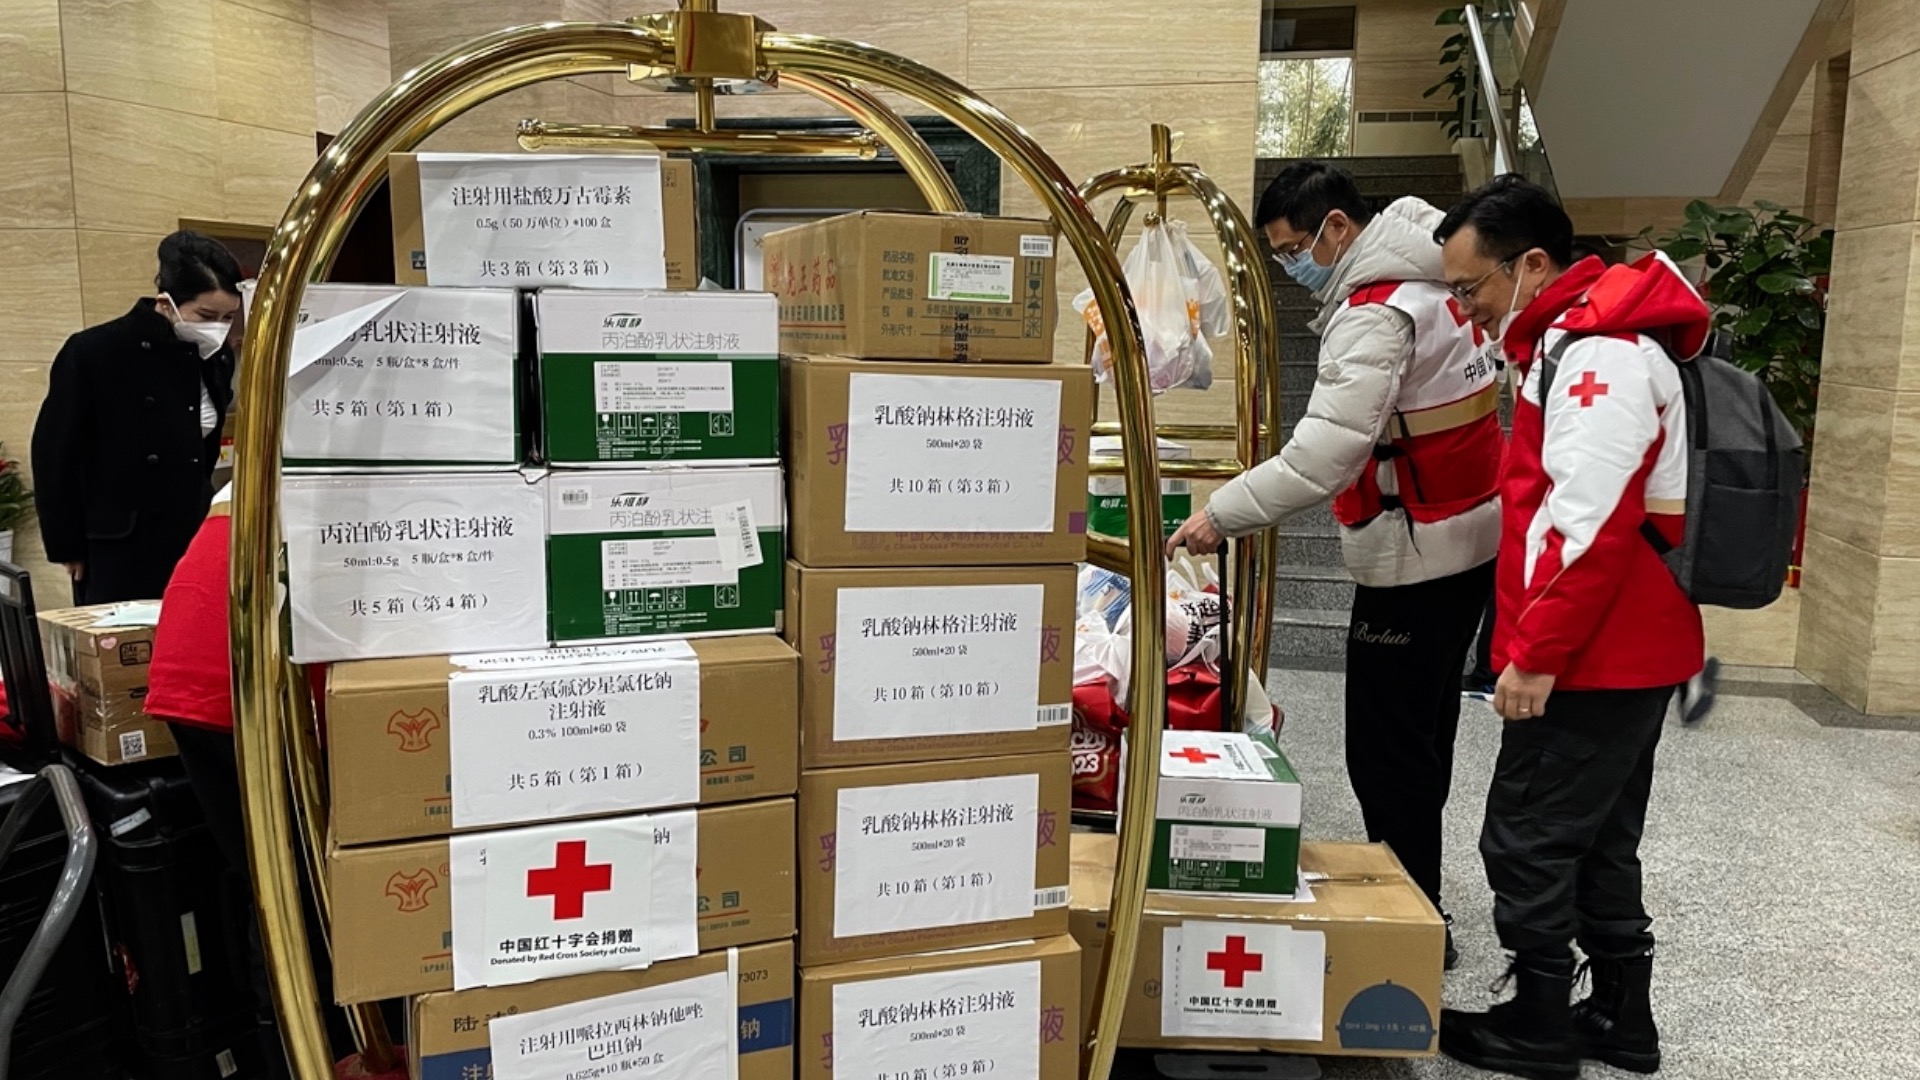 Red Cross Society of China's medical aid could help thousands in Syria